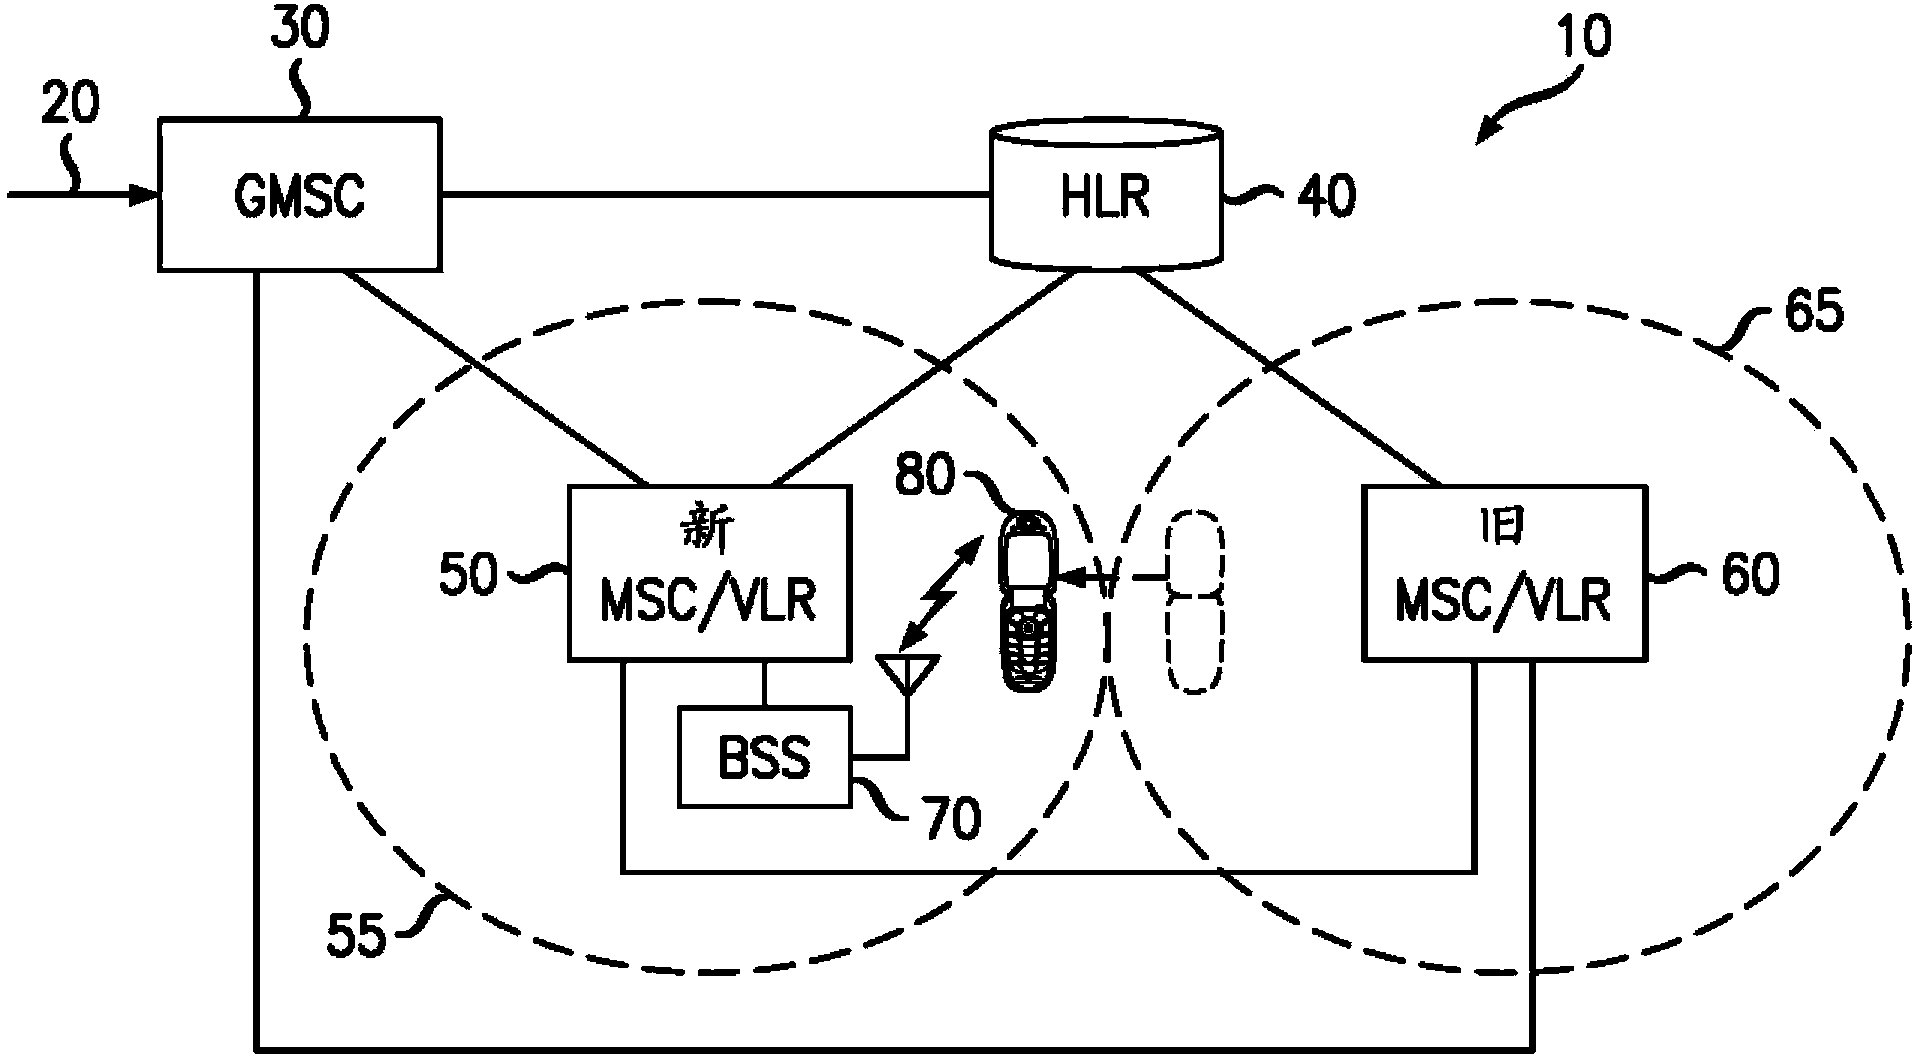 Mobile terminating roaming forwarding for mobile communications devices